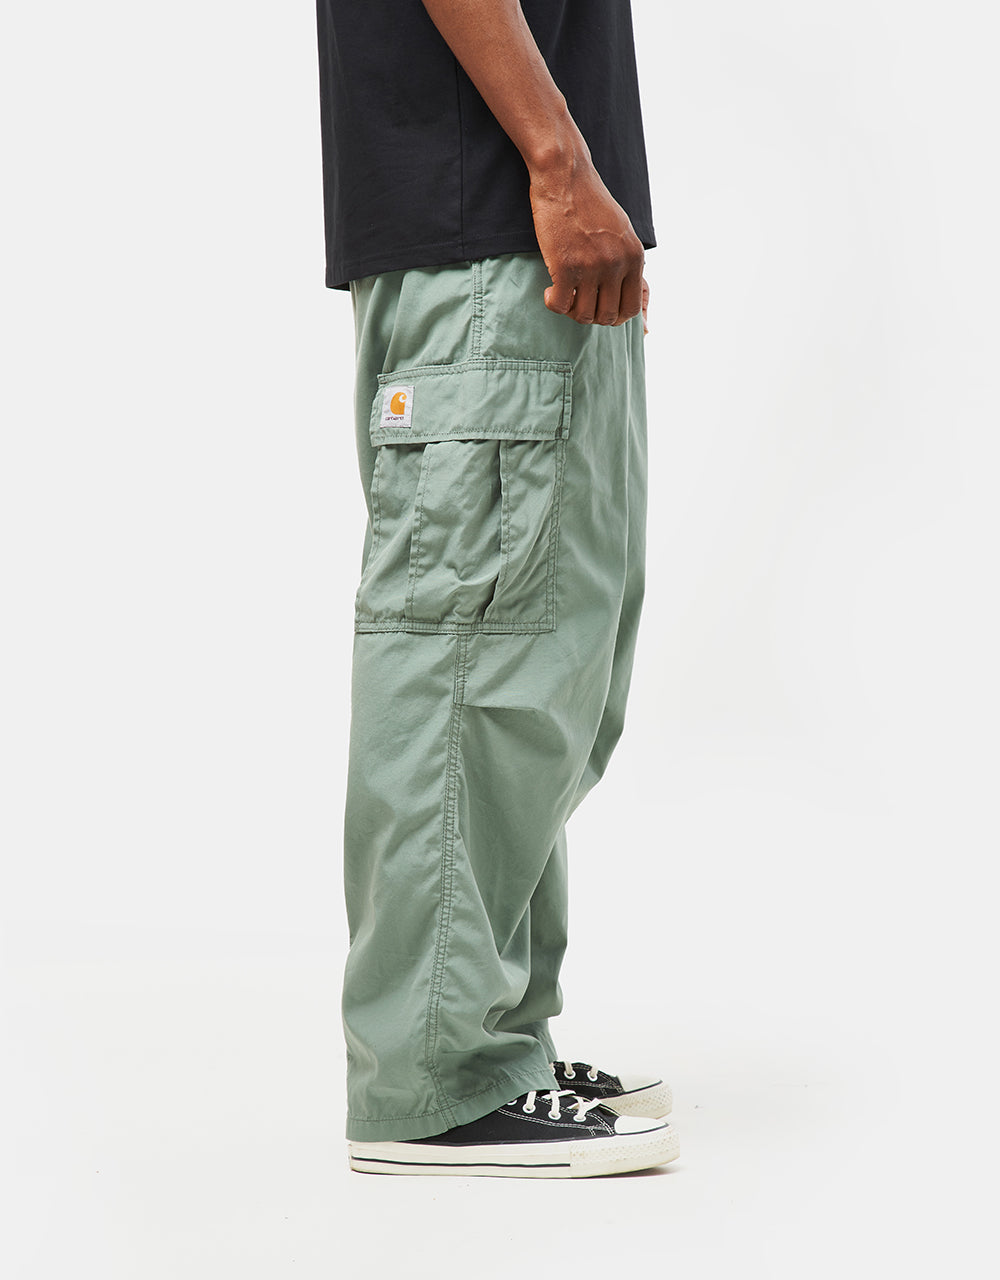 Carhartt WIP Cole Cargo Pant - Park (Rinsed)